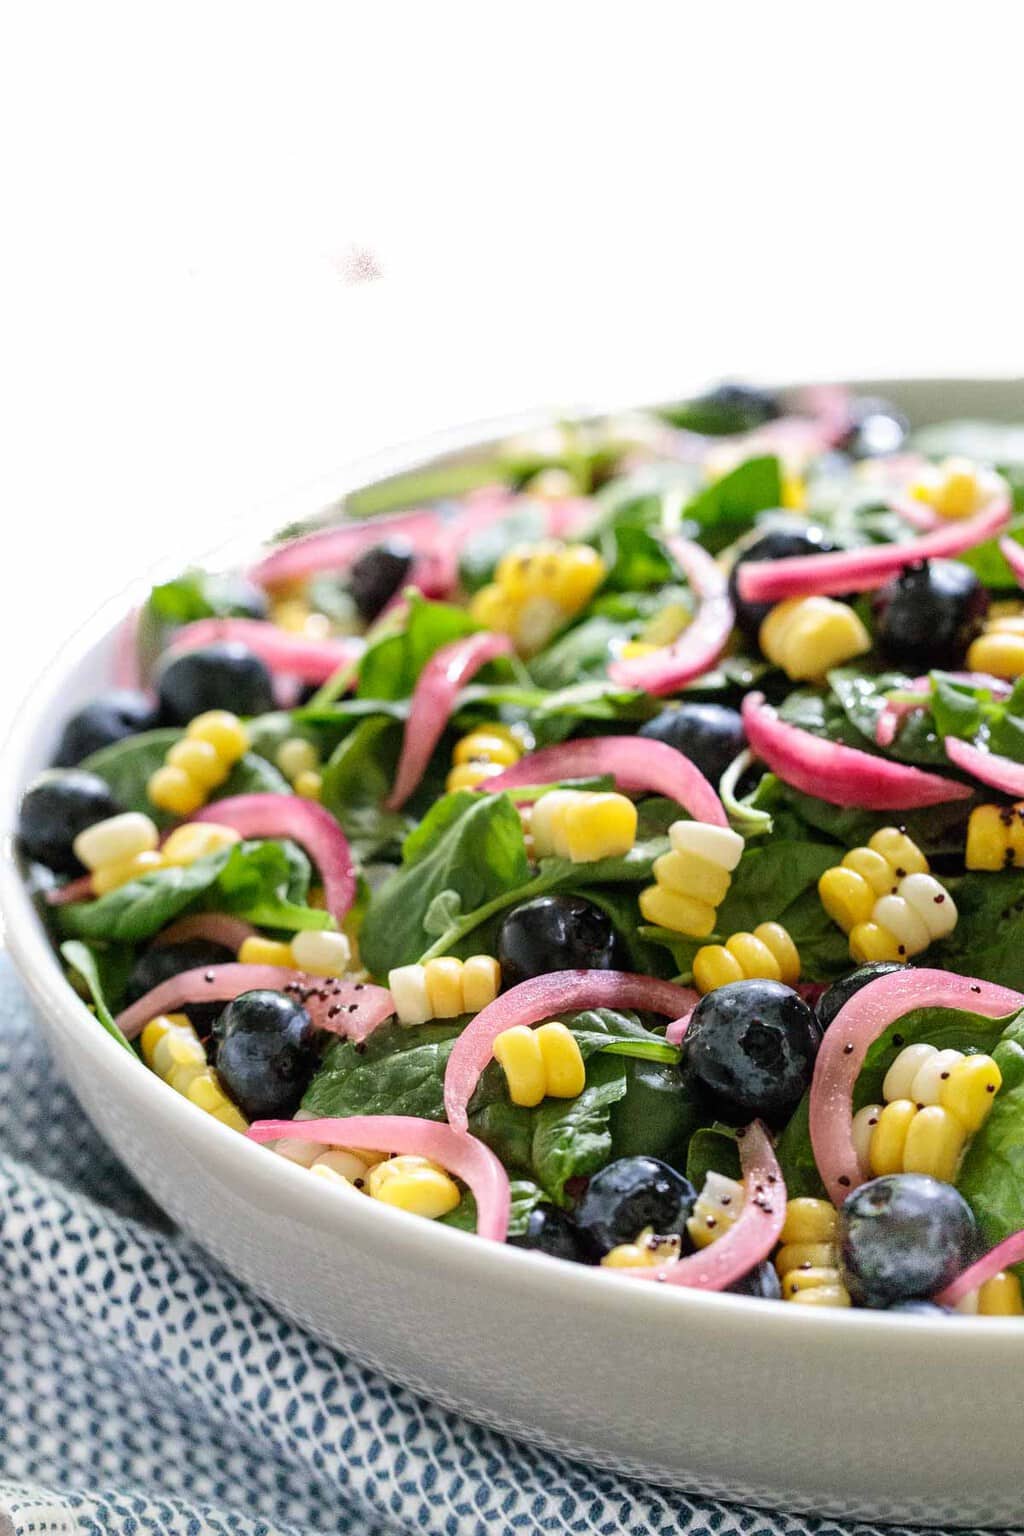 Vertical photo of a Blueberry and Fresh Corn Spinach Salad in a white serving dish with a blue and white patterned cloth in the foreground.